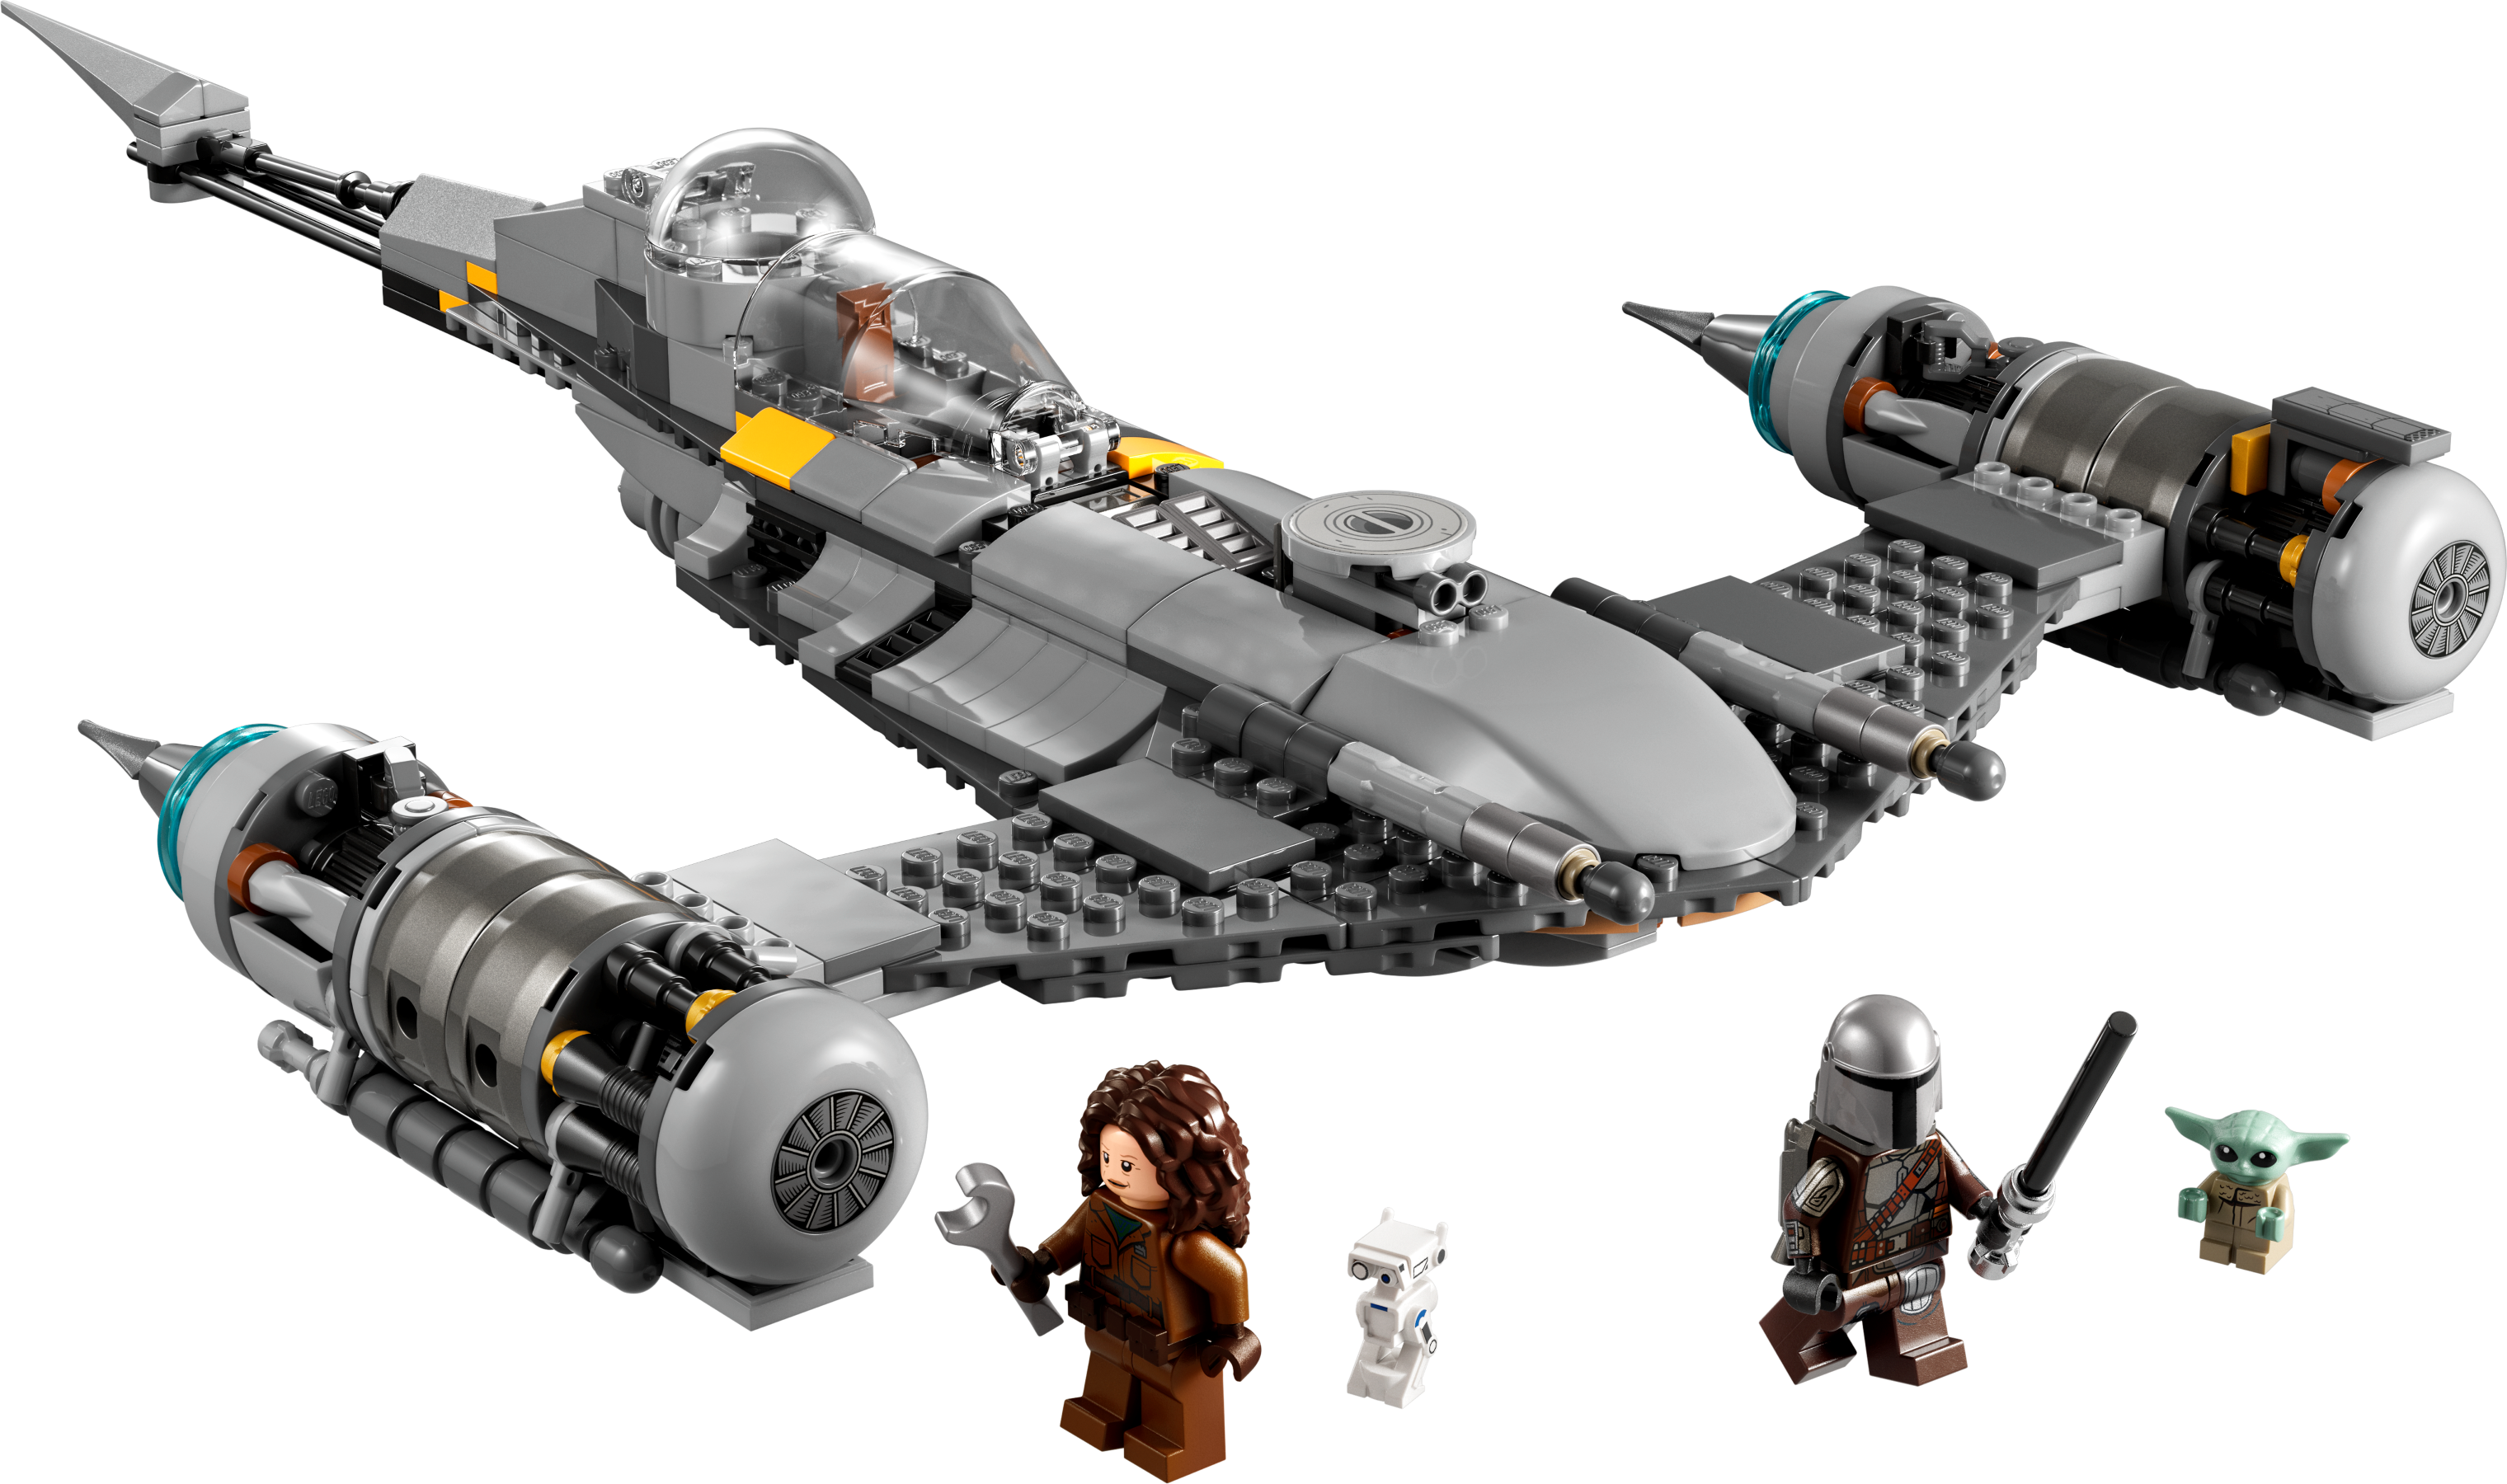 The Mandalorian's N-1 Starfighter™ 75325 | Star Wars™ | Buy online at the  Official LEGO® Shop US